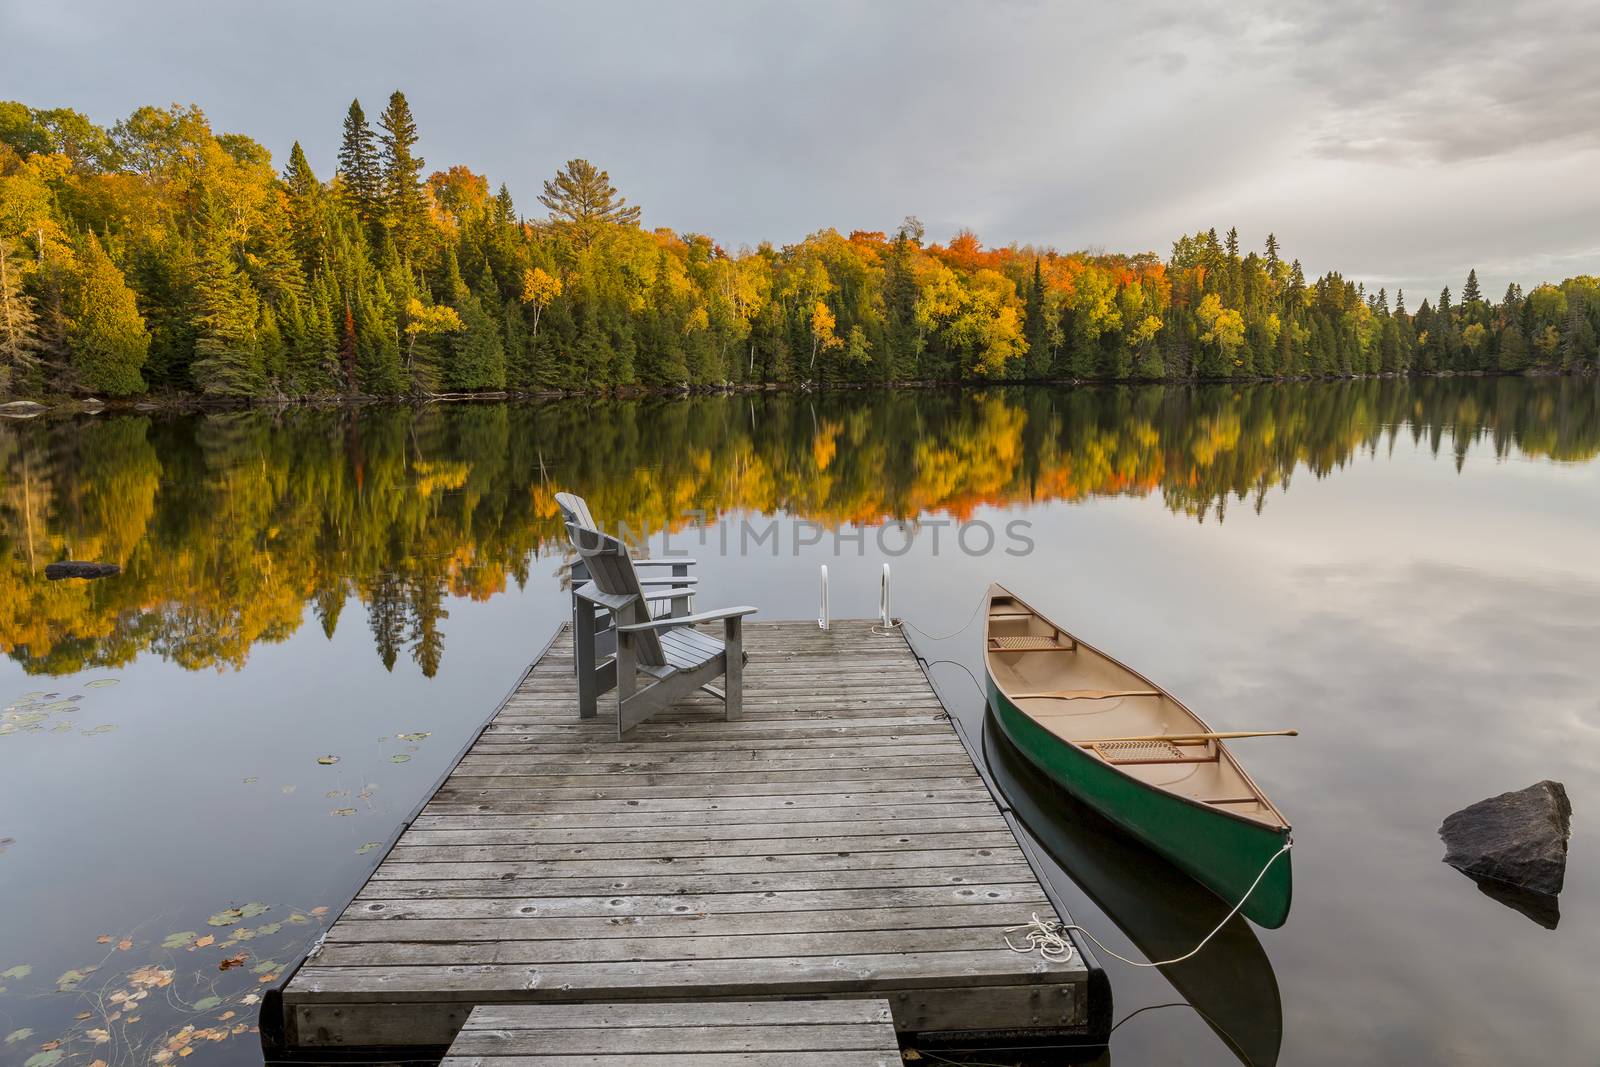 Canoe tied to a dock on an autumn lake in Ontario, Canada